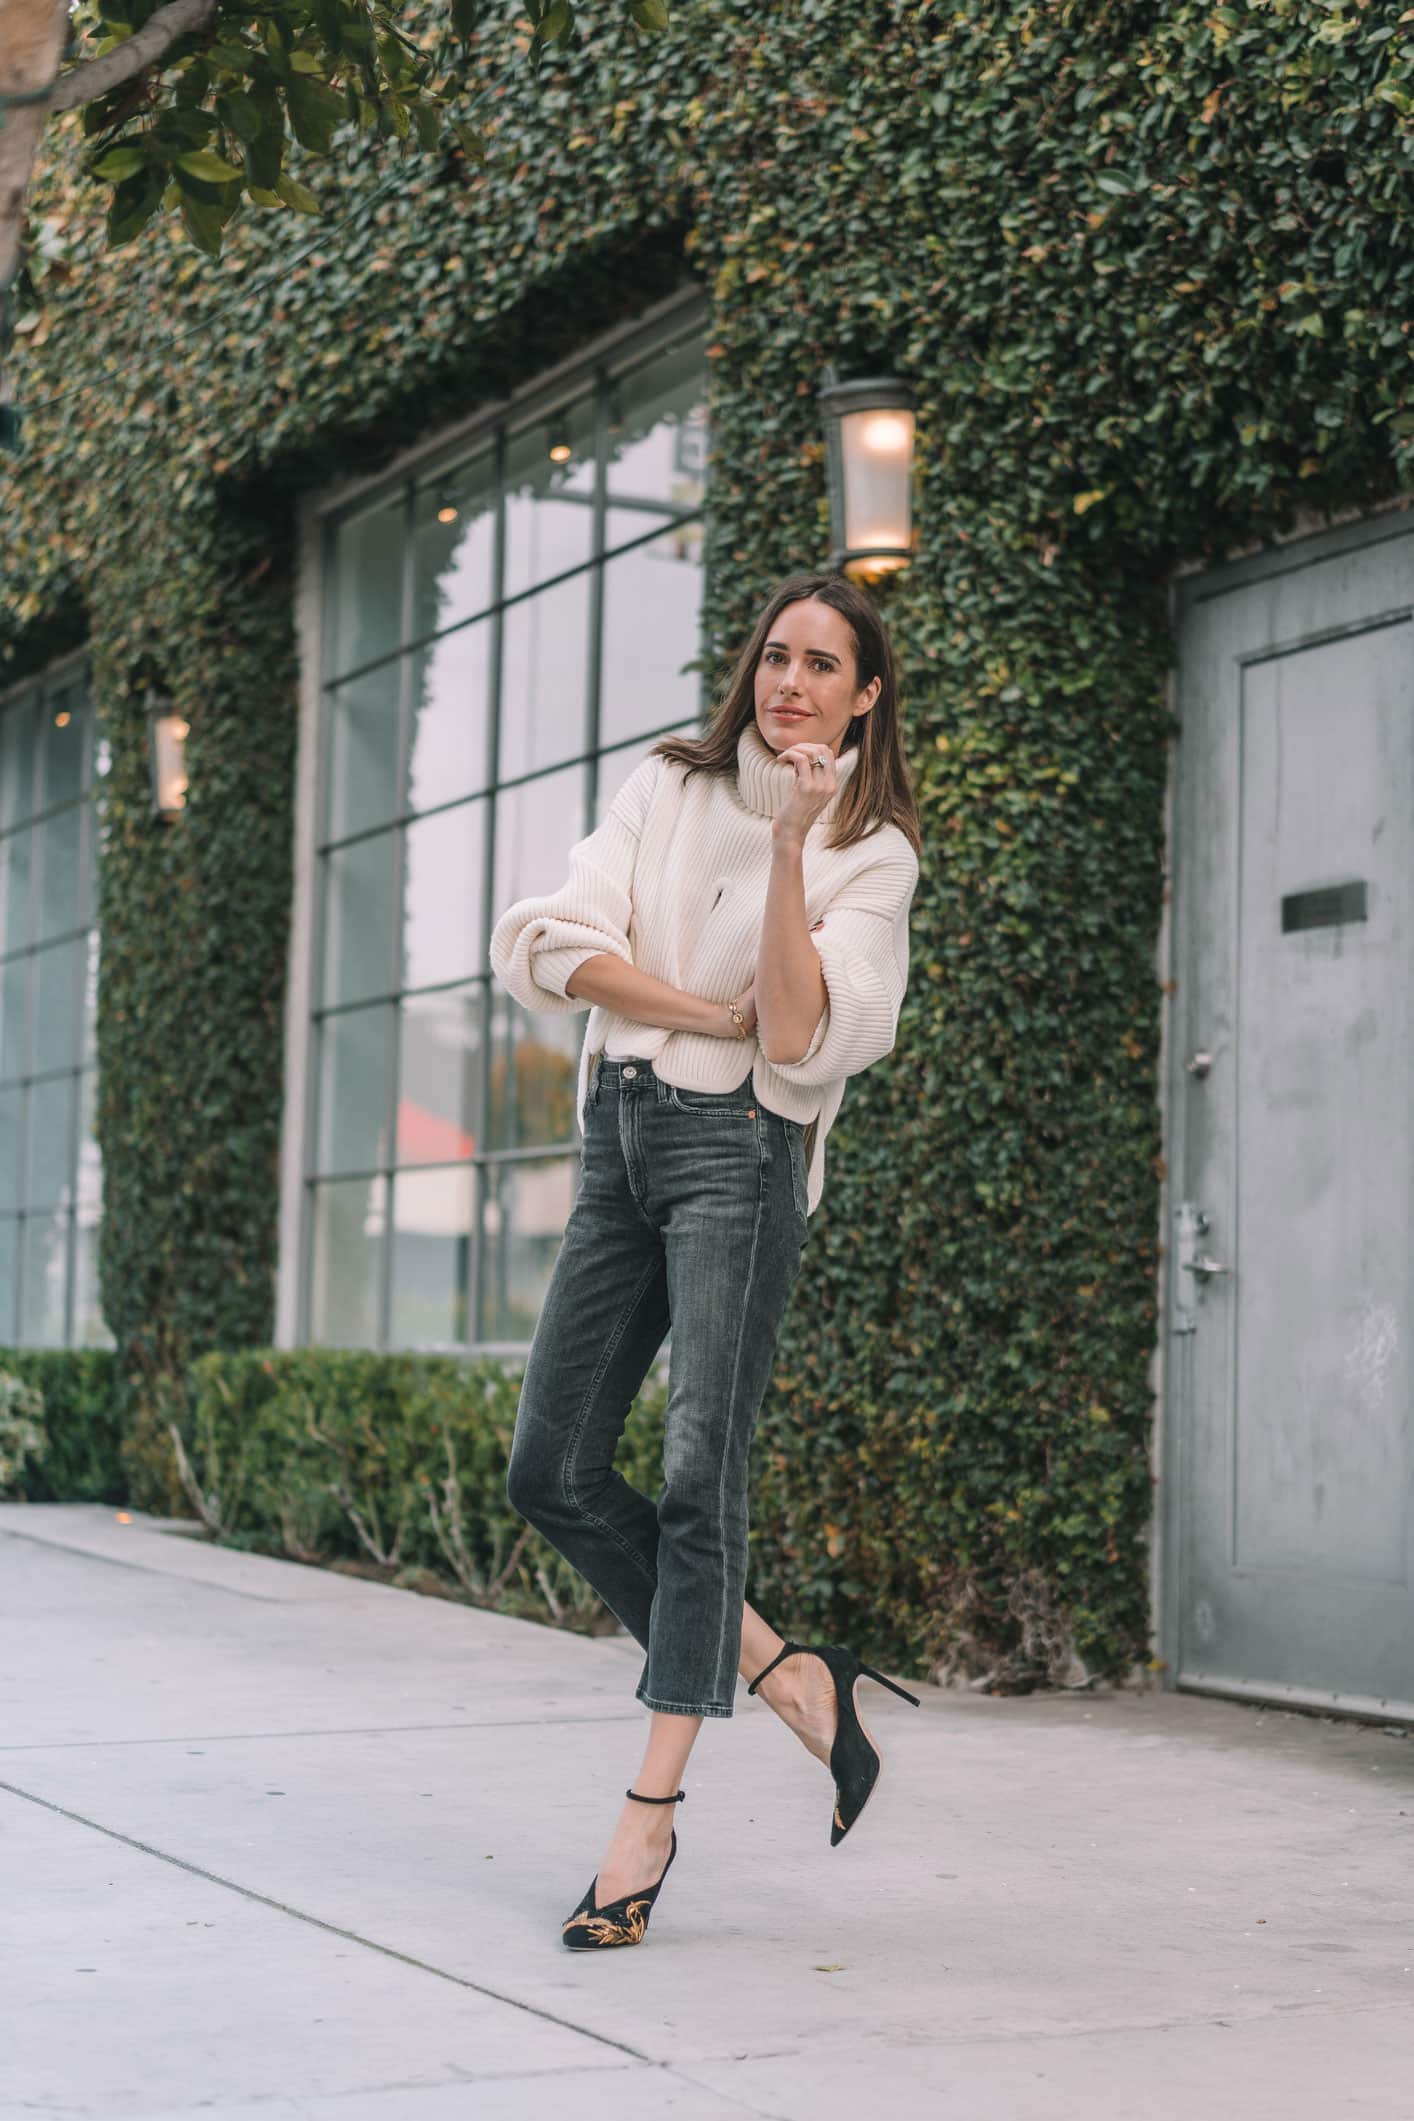 How To Upgrade A Casual Look With This One Item - Front Roe by Louise Roe